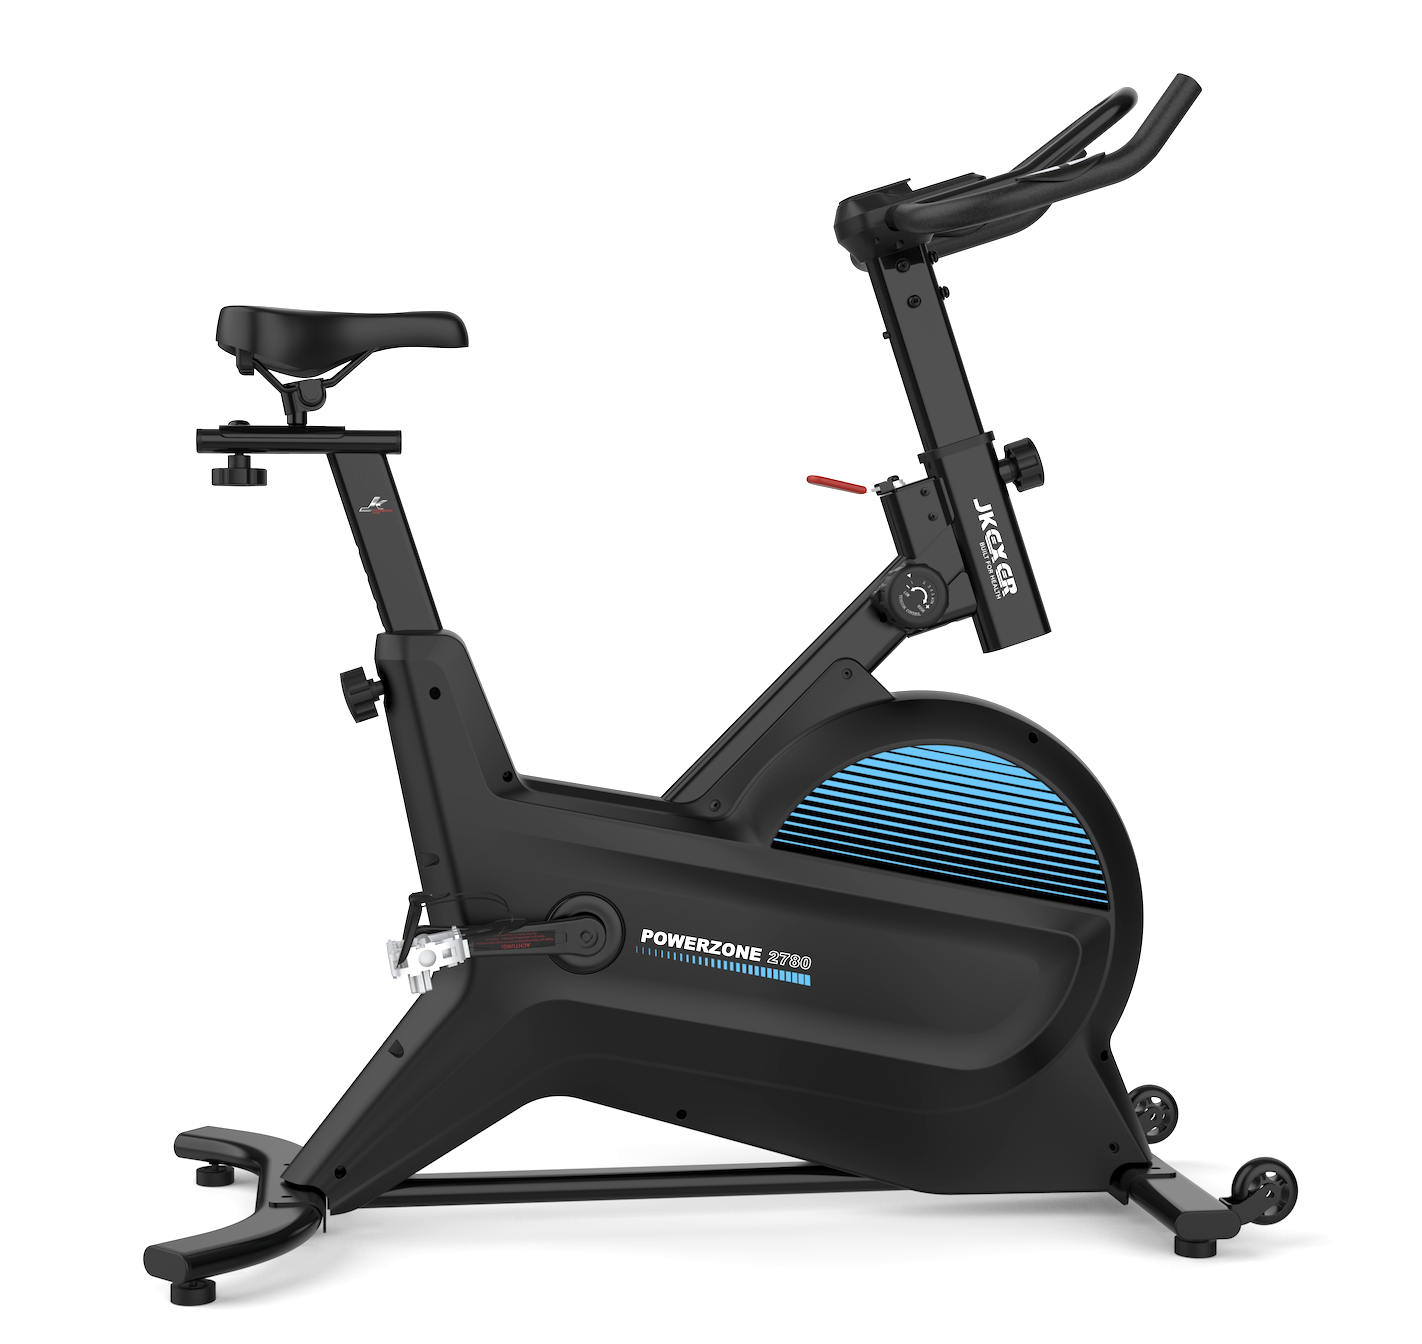 Belt Drive and Magnetic Resistance Indoor Cycling Bike, JKEXER 2780 Powerzone